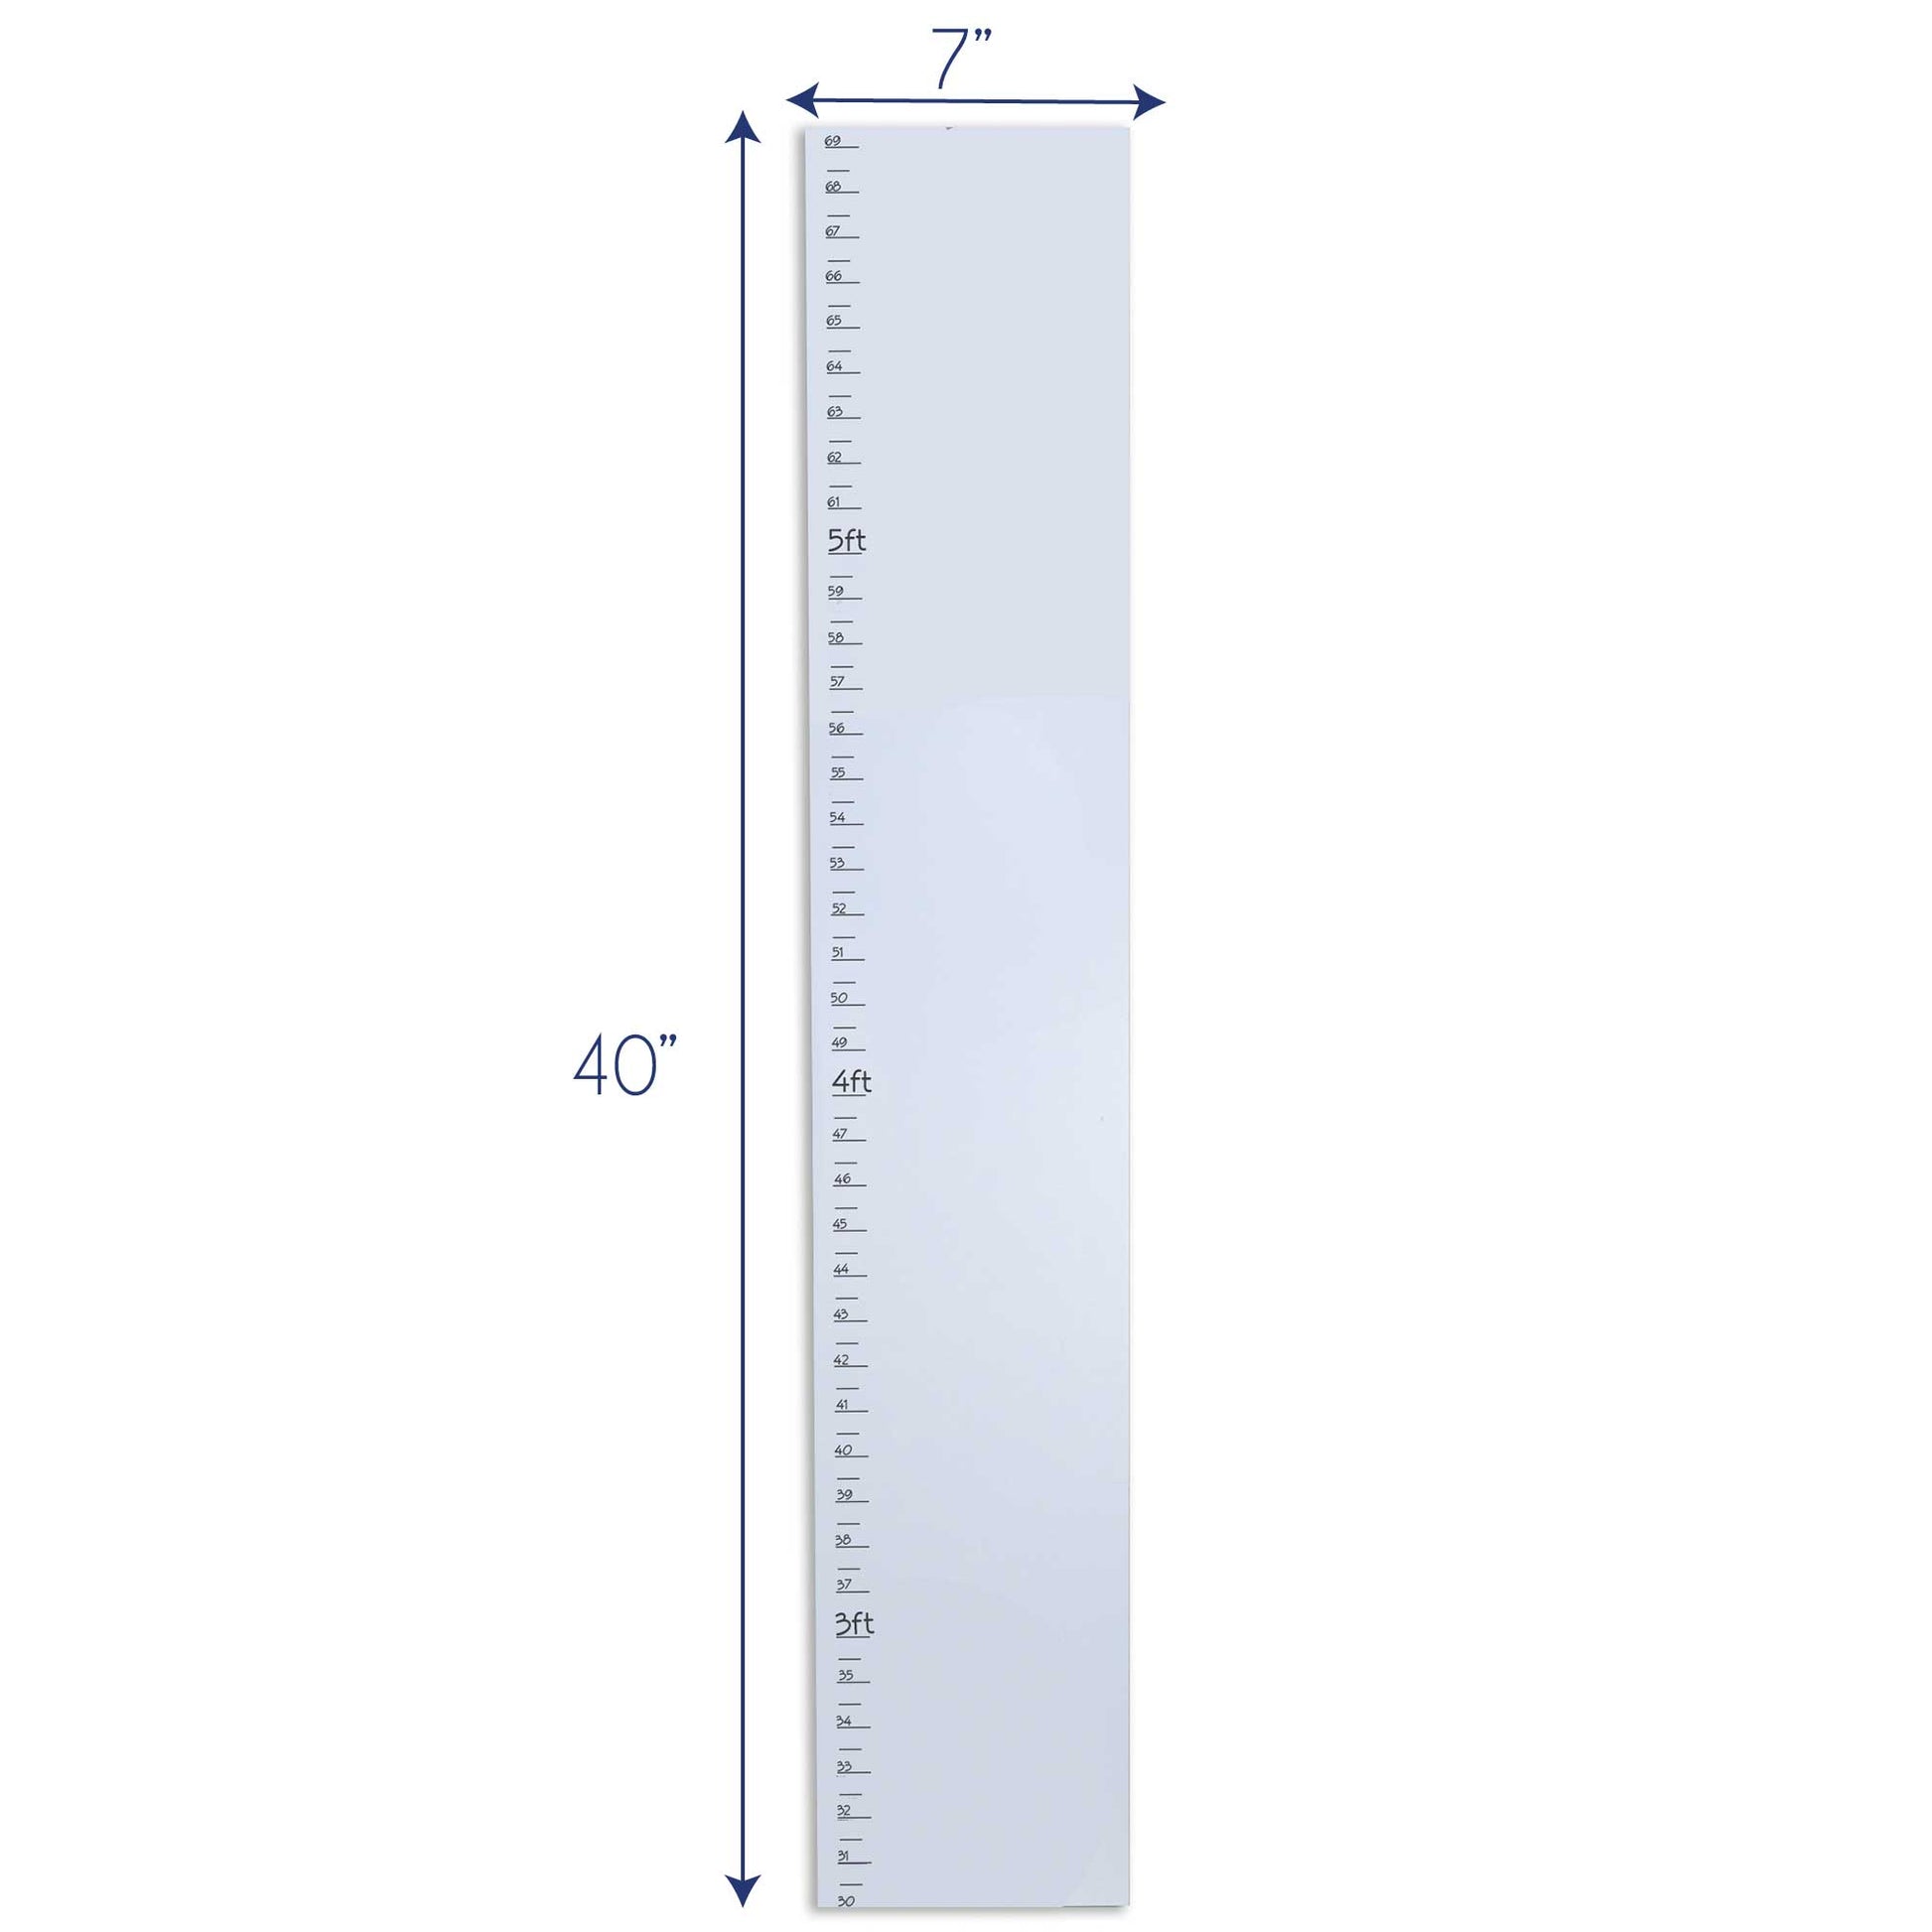 Personalized White Growth Chart With Stemmed Flowers Design